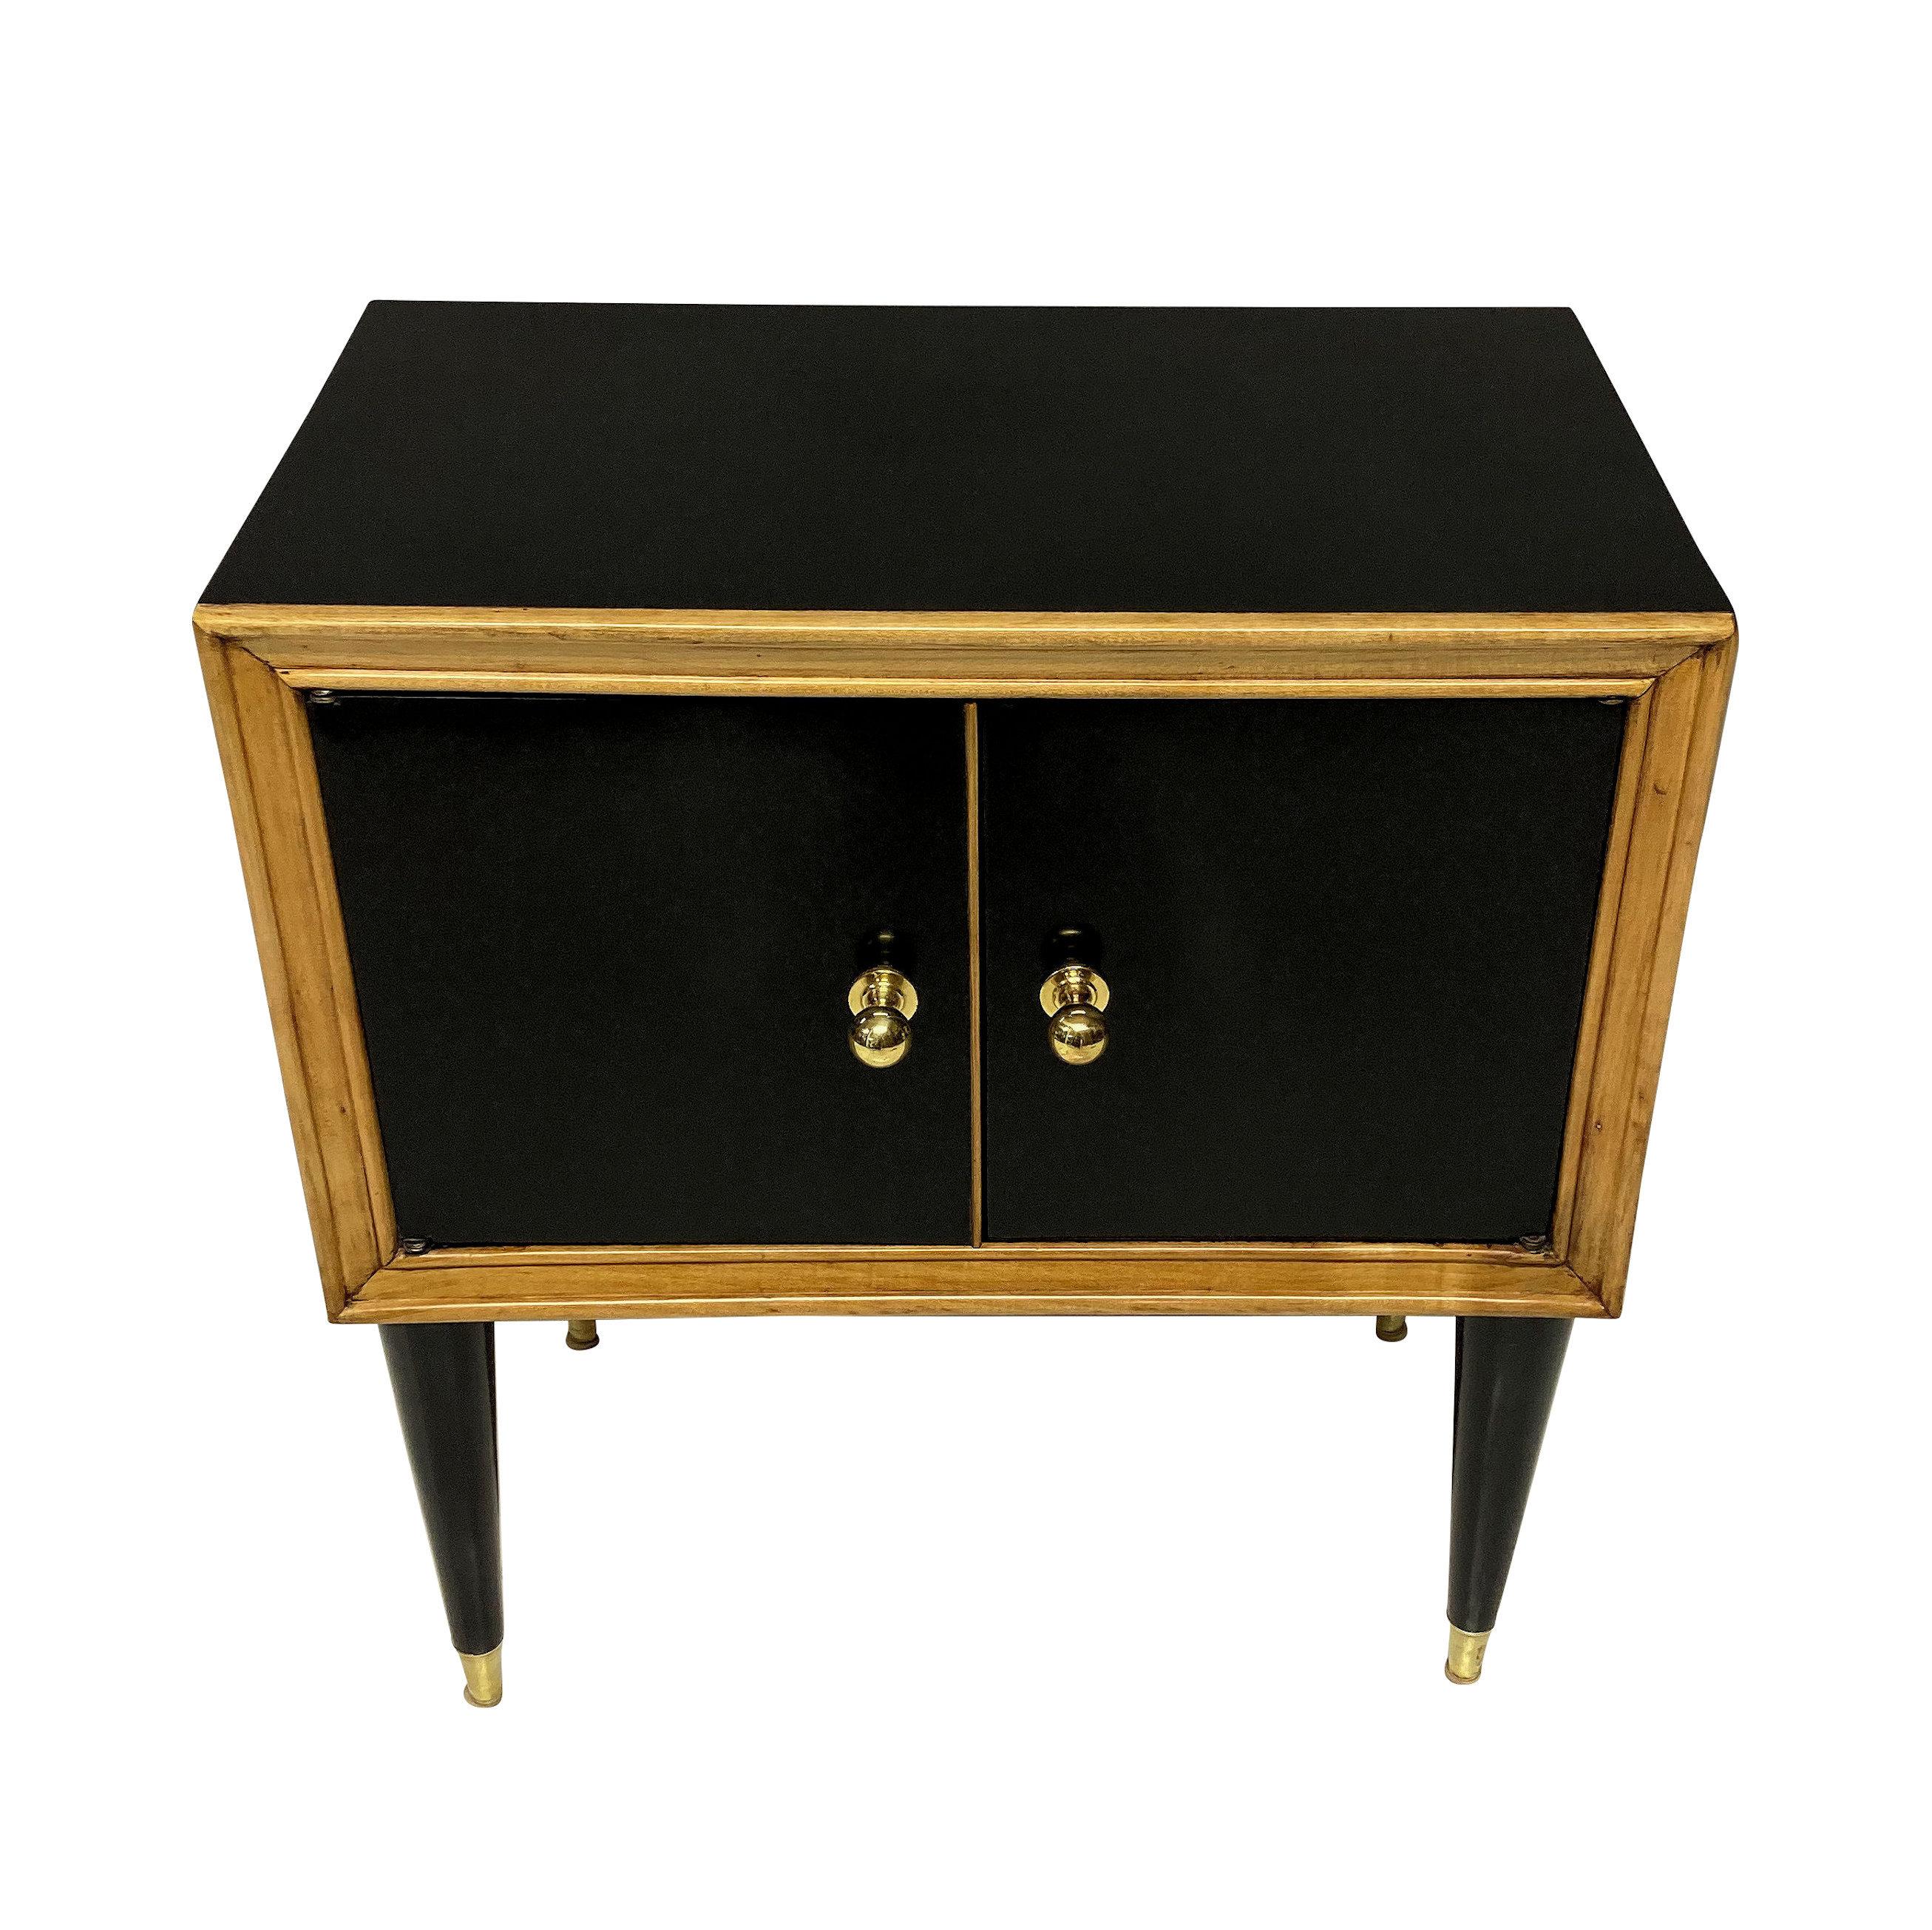 A pair of French midcentury nightstands, ebonised with brass sabot and handles and pale wood moulding detail.